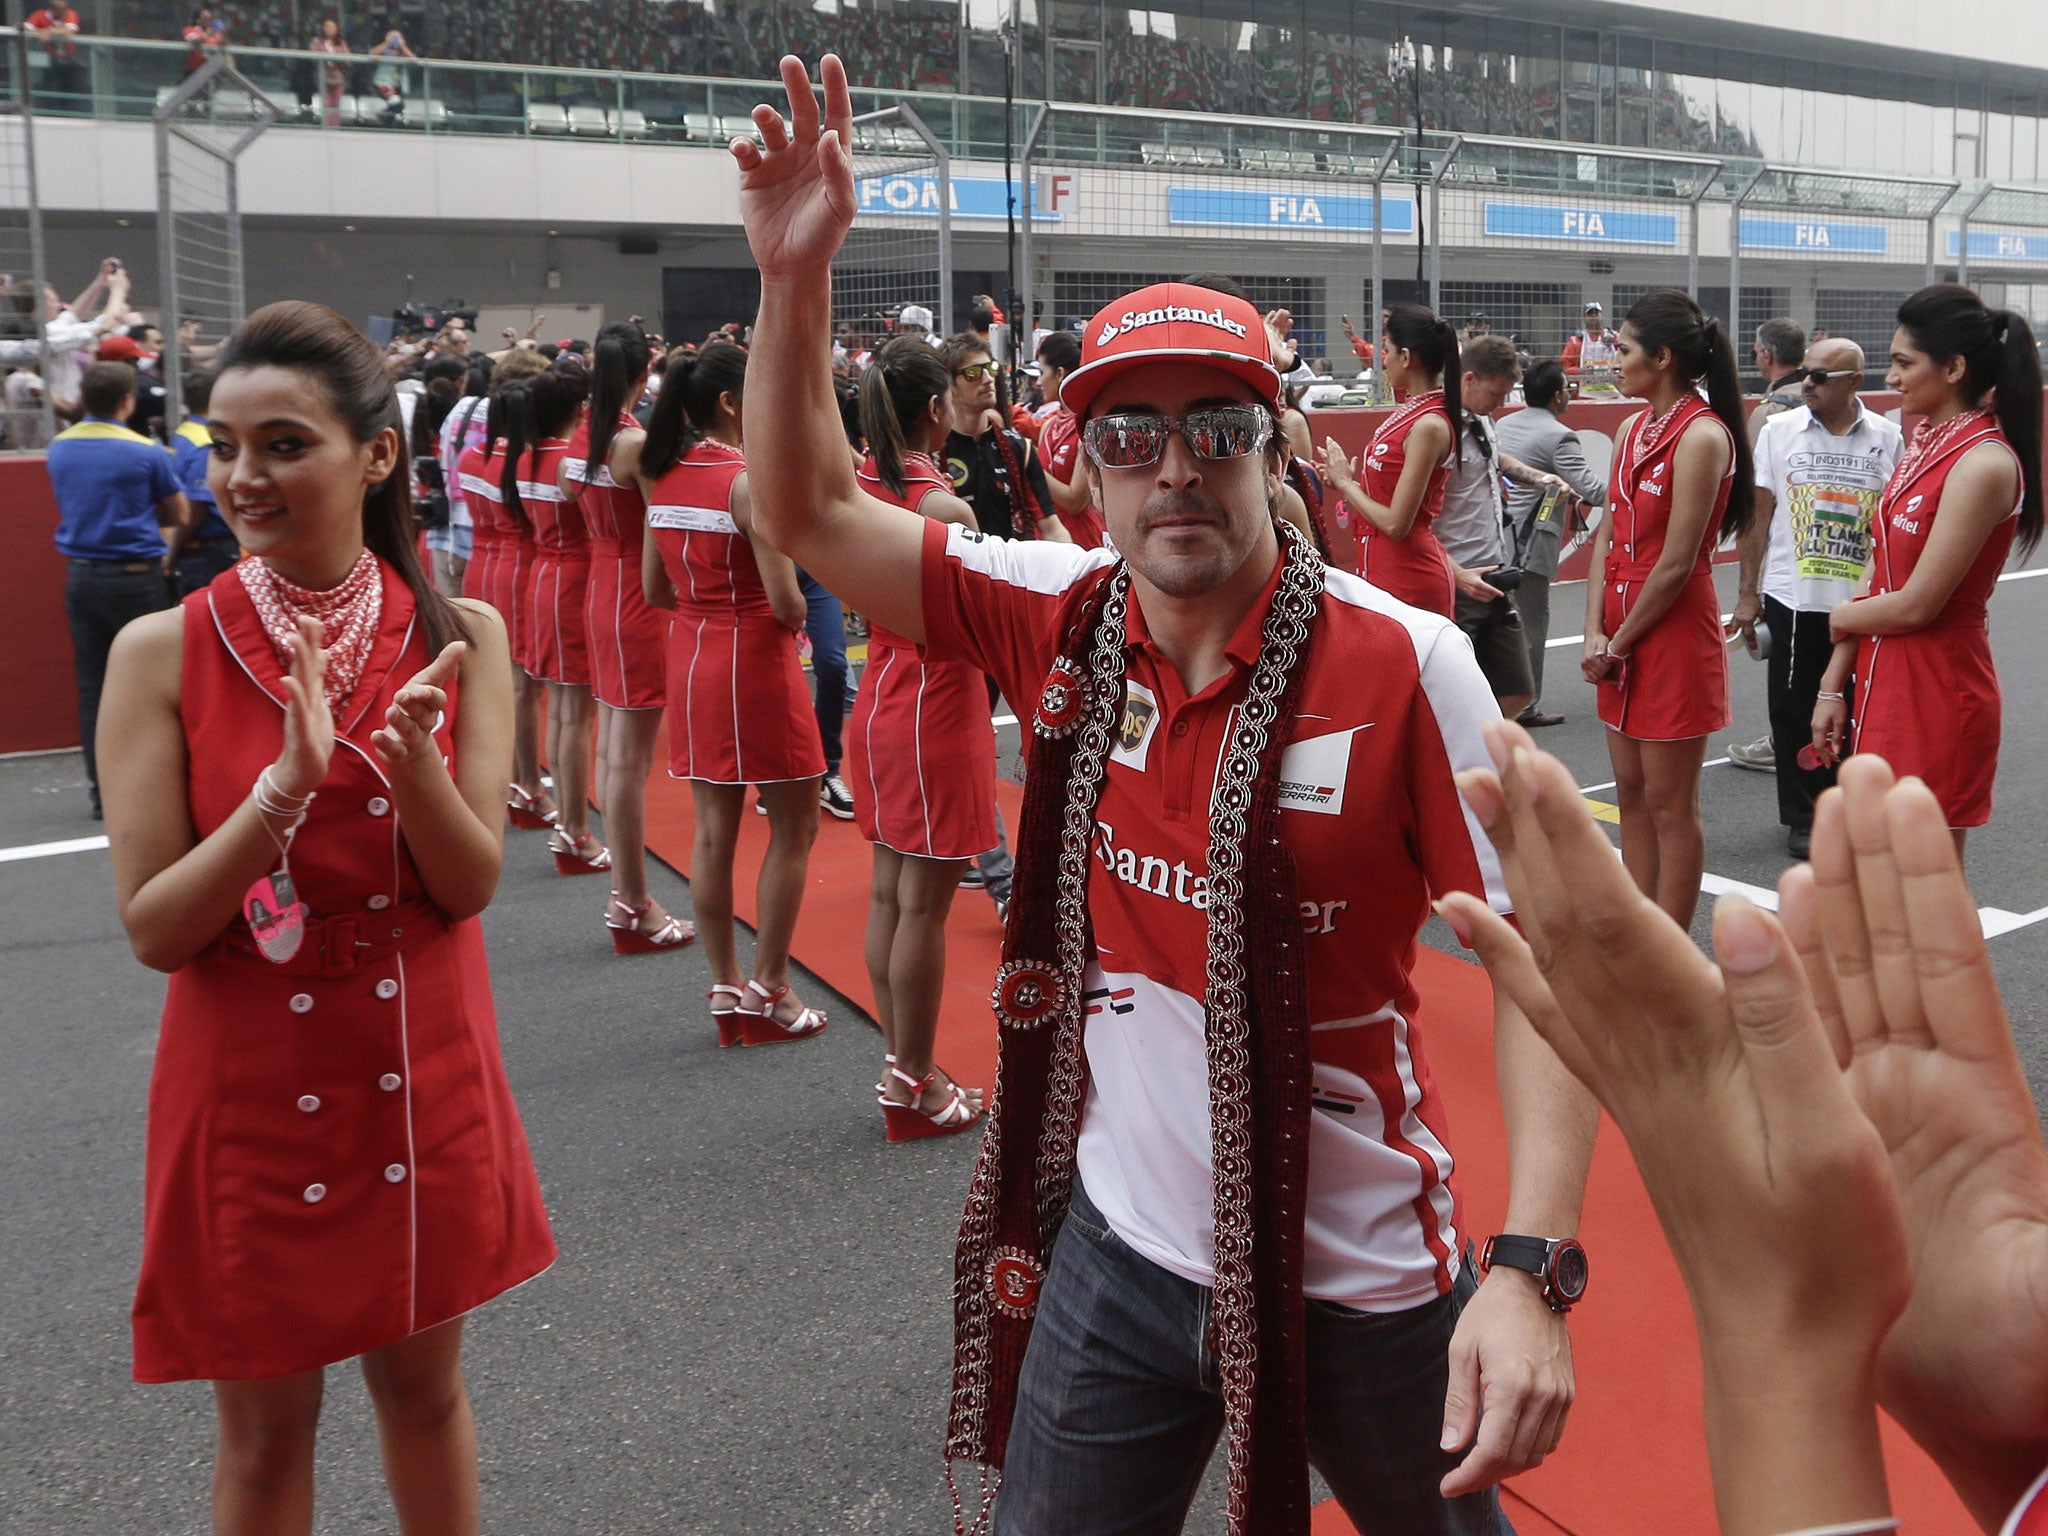 Fernando Alonso waves to the crowd during the drivers’ parade